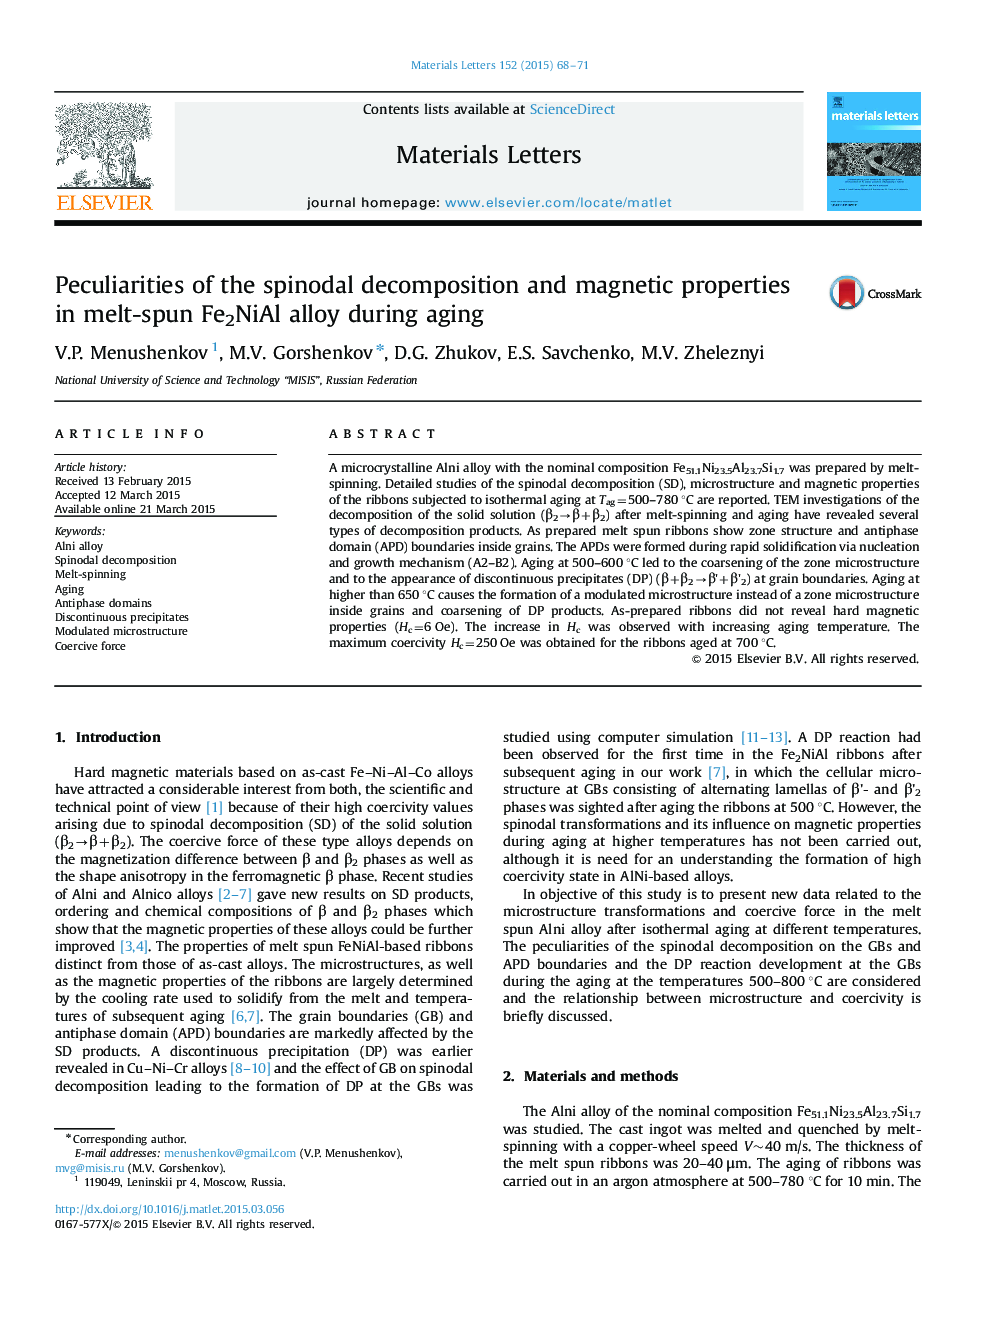 Peculiarities of the spinodal decomposition and magnetic properties in melt-spun Fe2NiAl alloy during aging